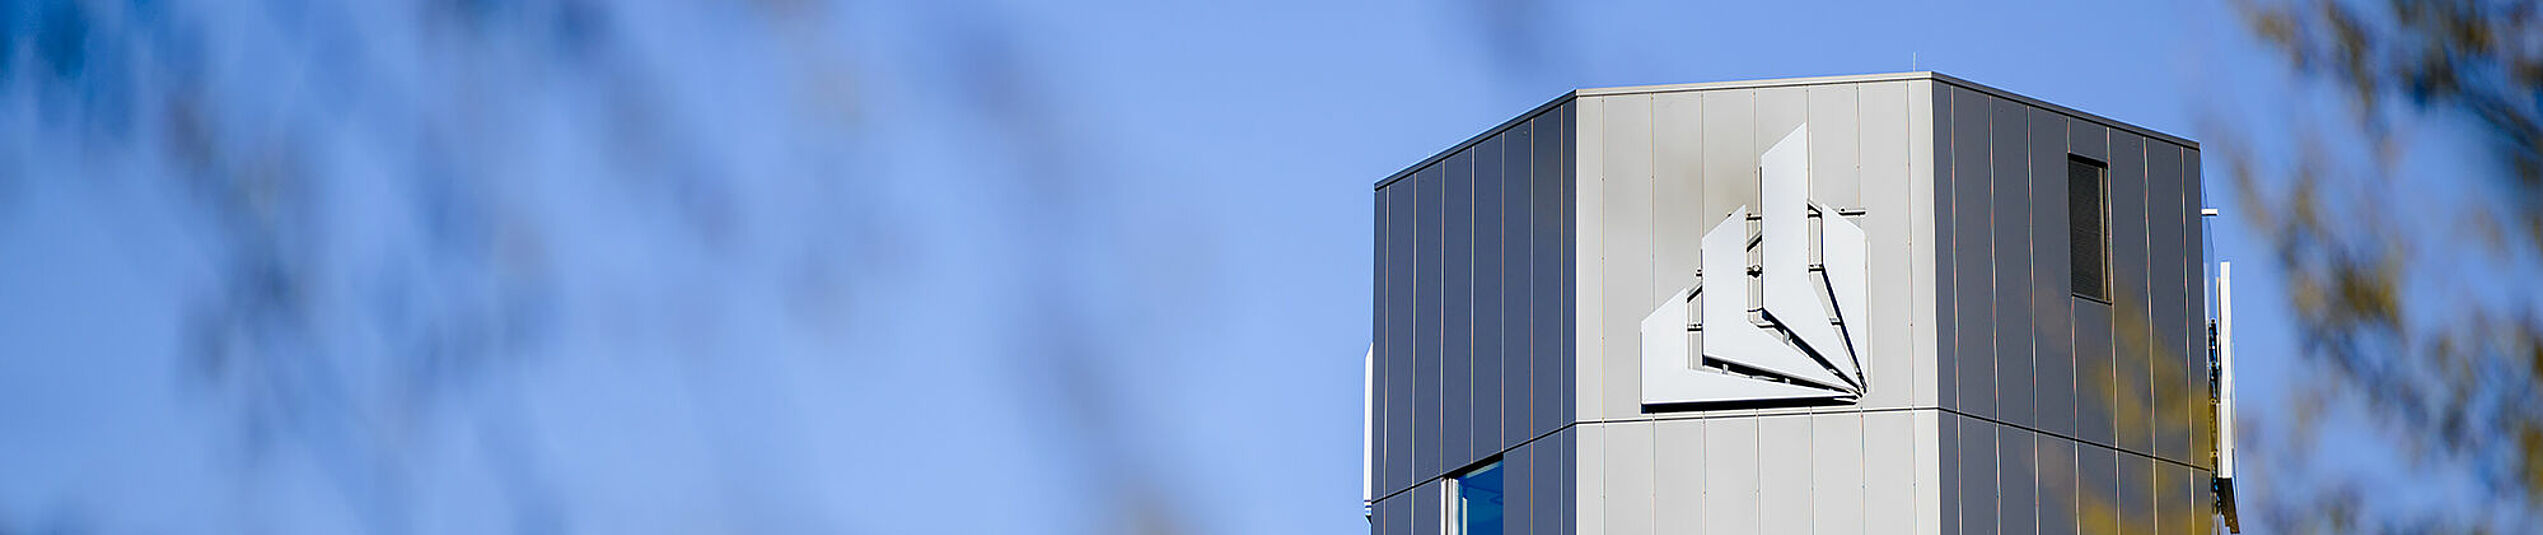 The upper part of the dark grey octahedral tower with the figurative mark of the logo of Paderborn University in front of a blue sky.